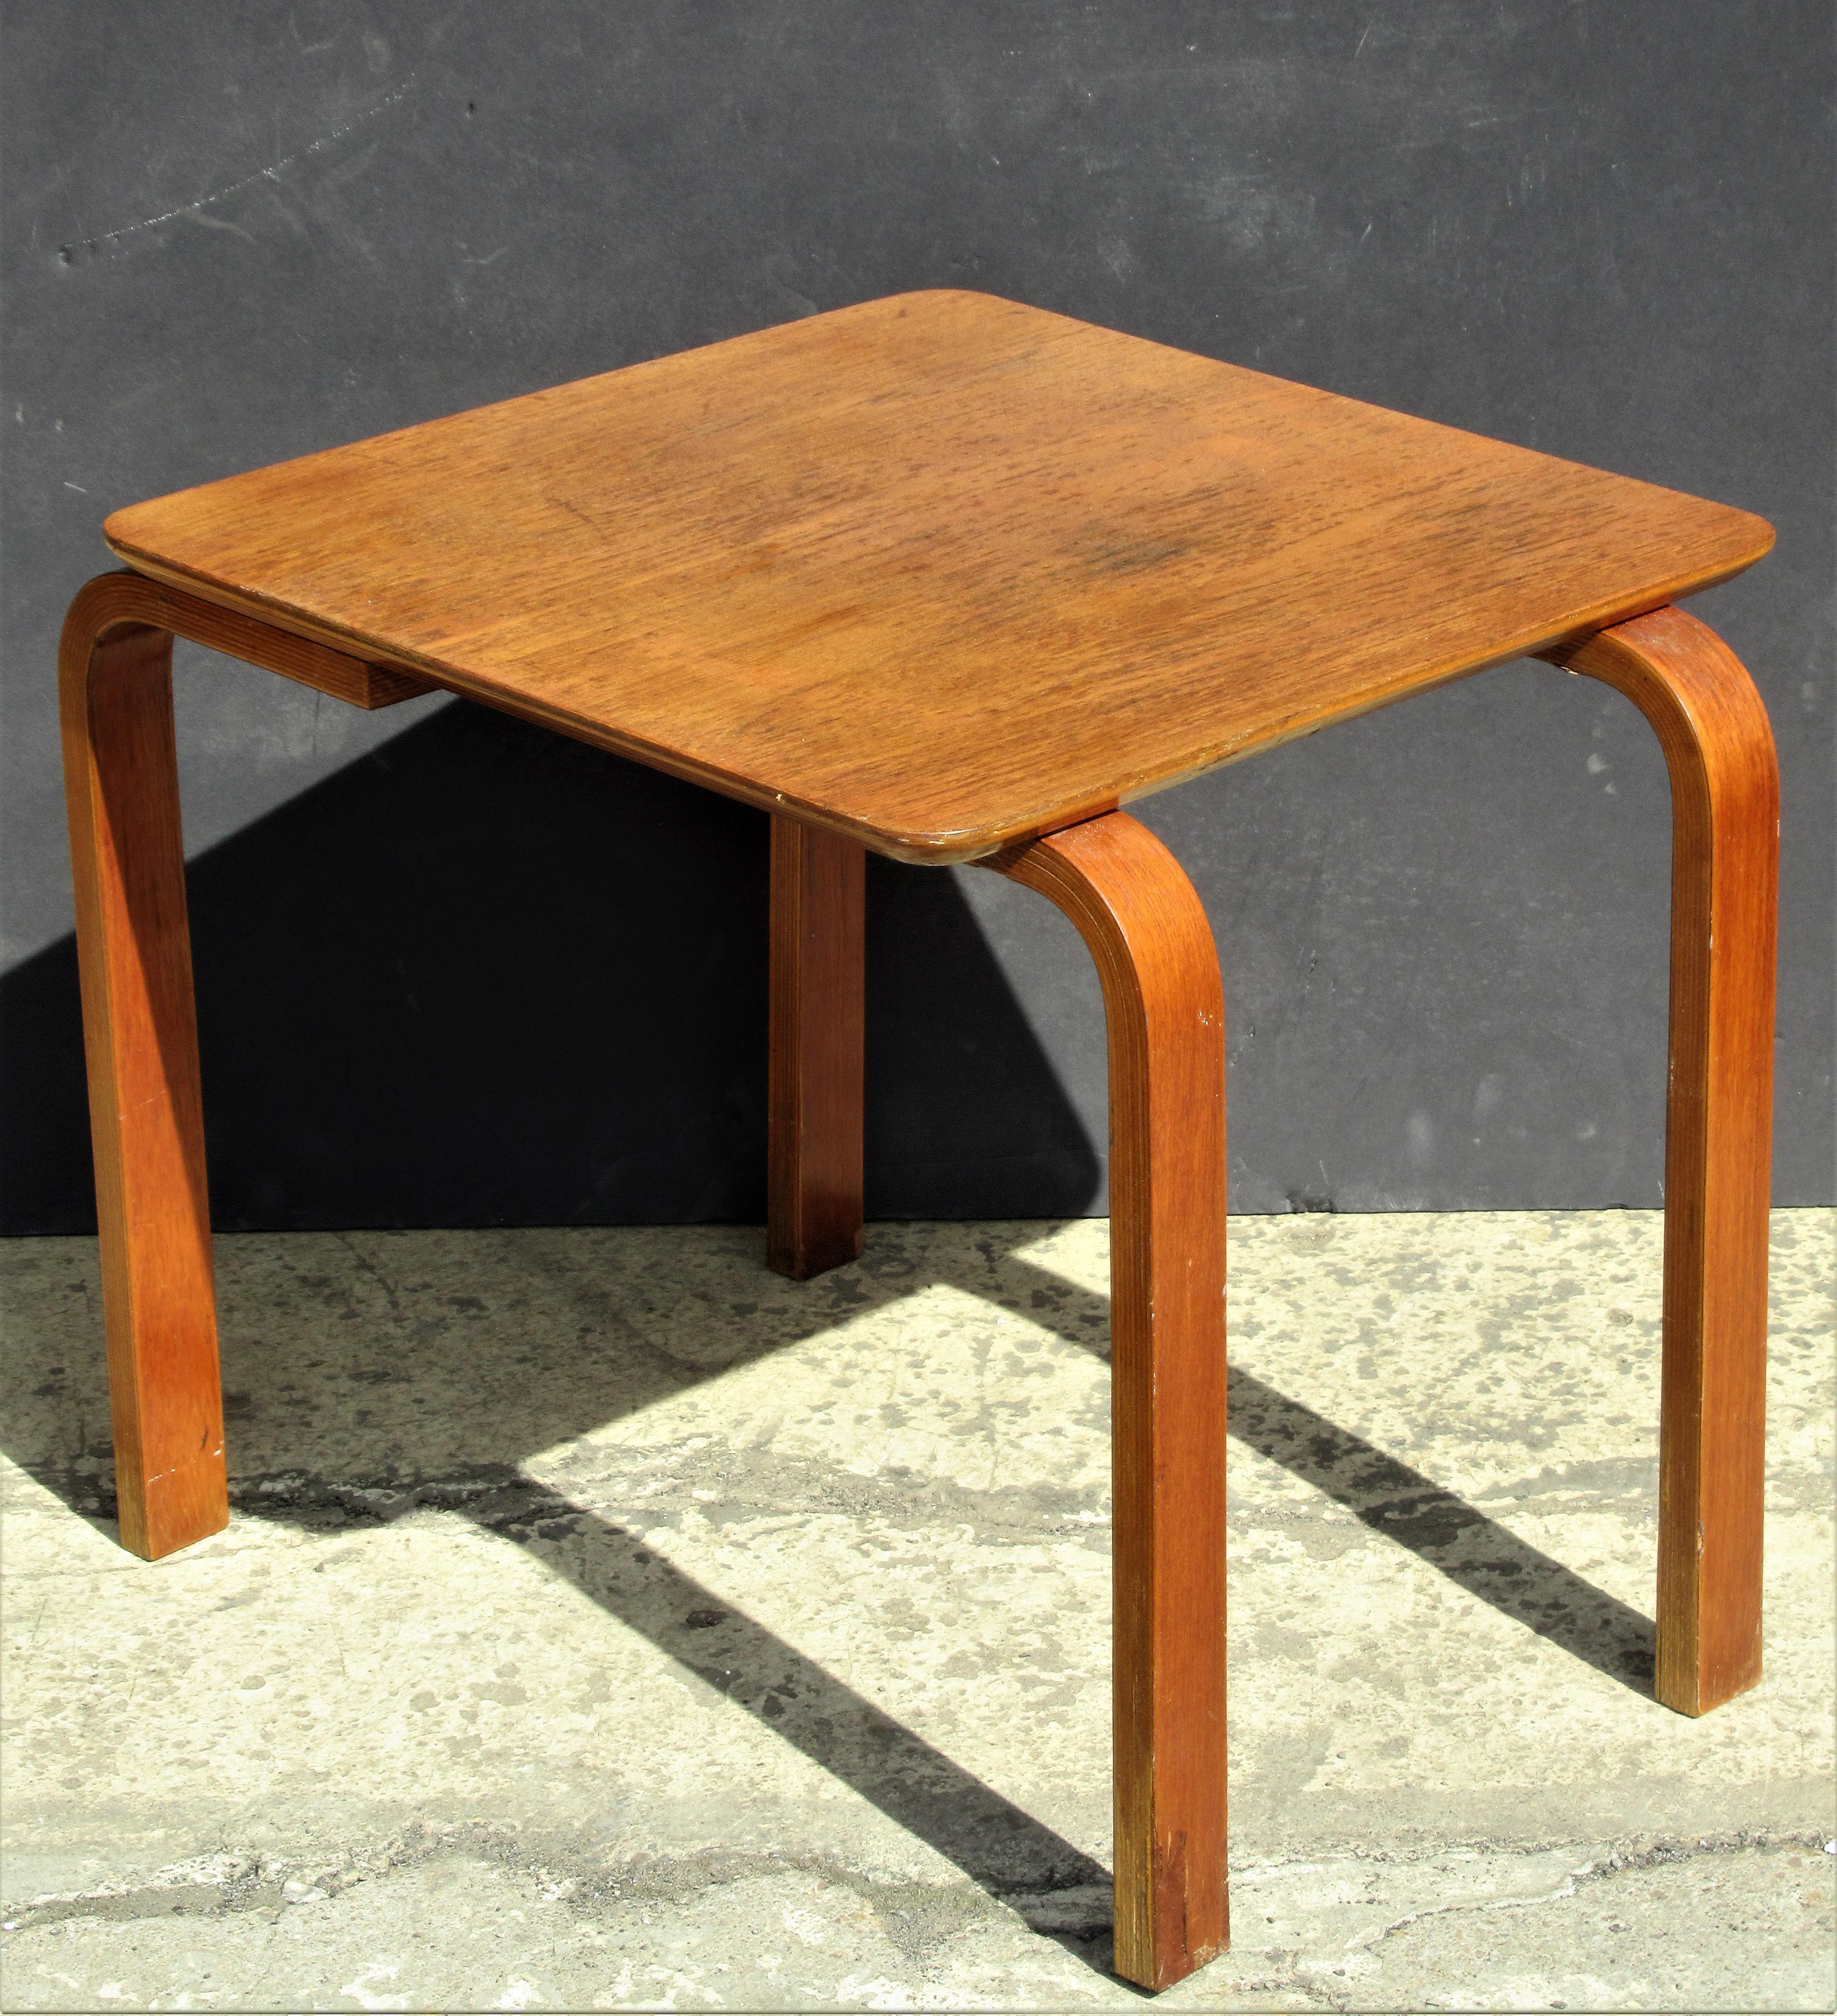 ln the style of early Alvar Aalto for Finmar an unusual bent stack laminated plywood and teak veneer occasional side table in all original aged condition with no restorations. Stamped branded on underside in by all legs and center - Made in Denmark.